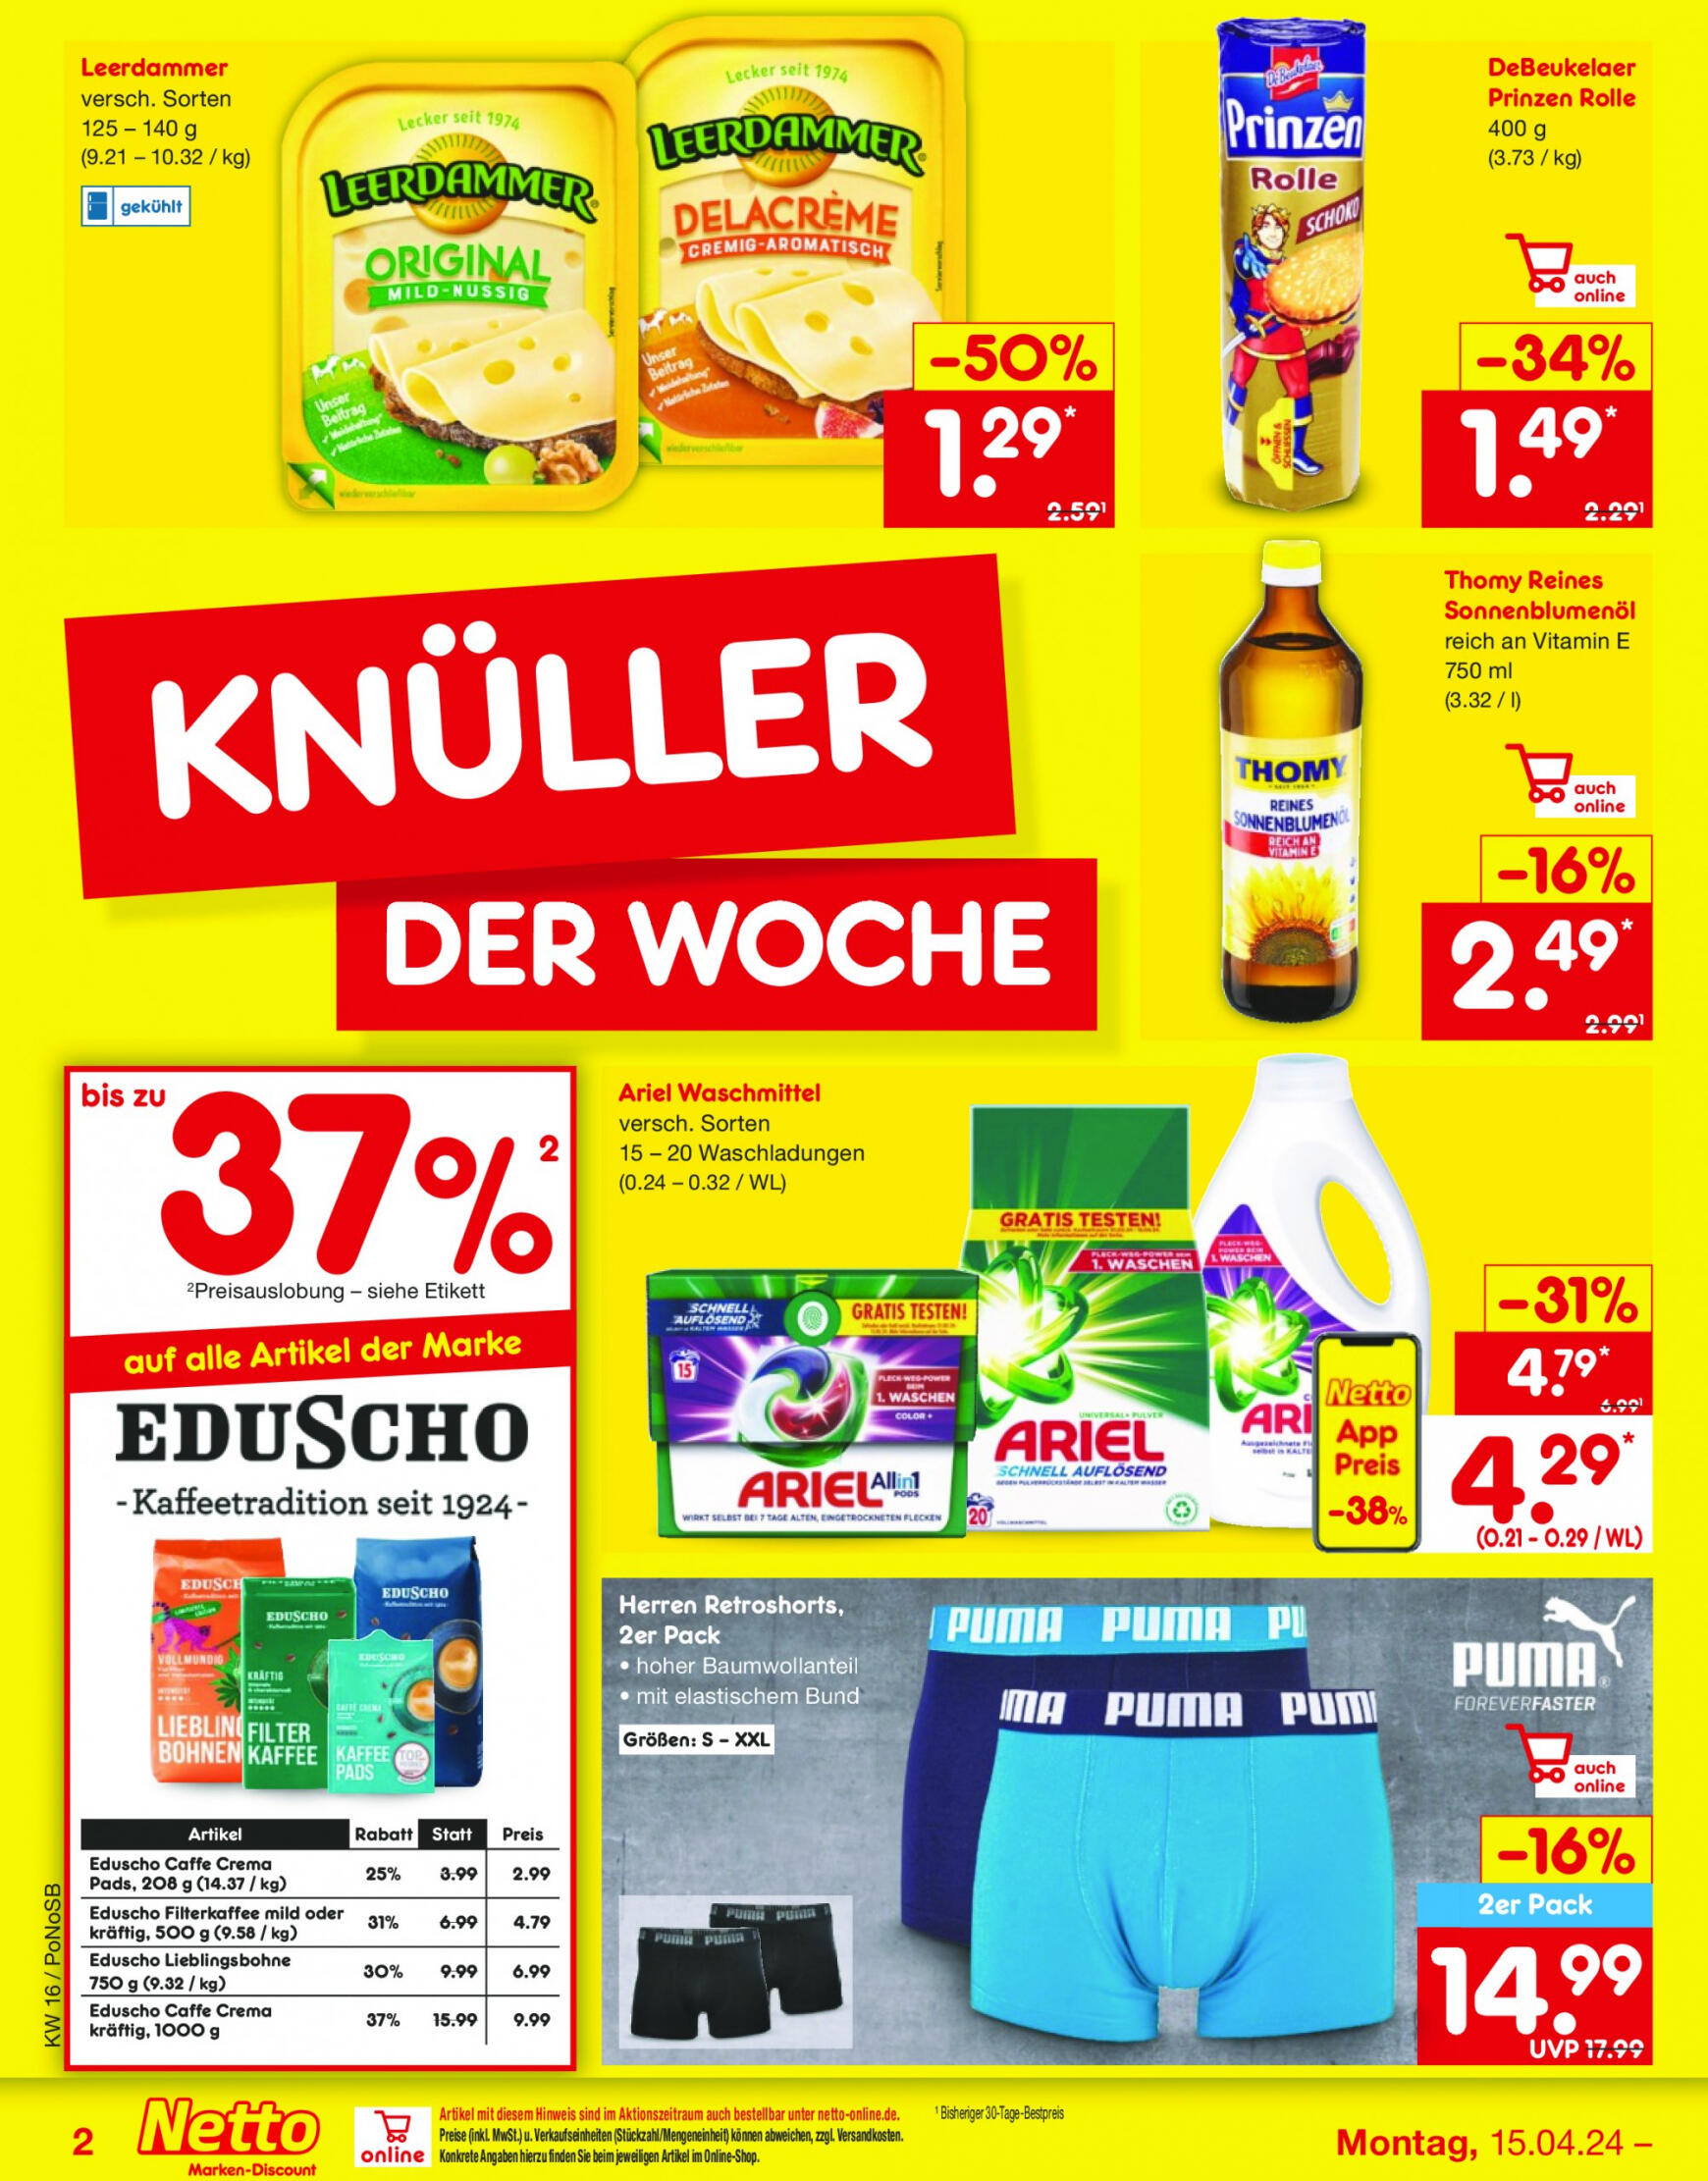 netto - Flyer Netto aktuell 15.04. - 20.04. - page: 2